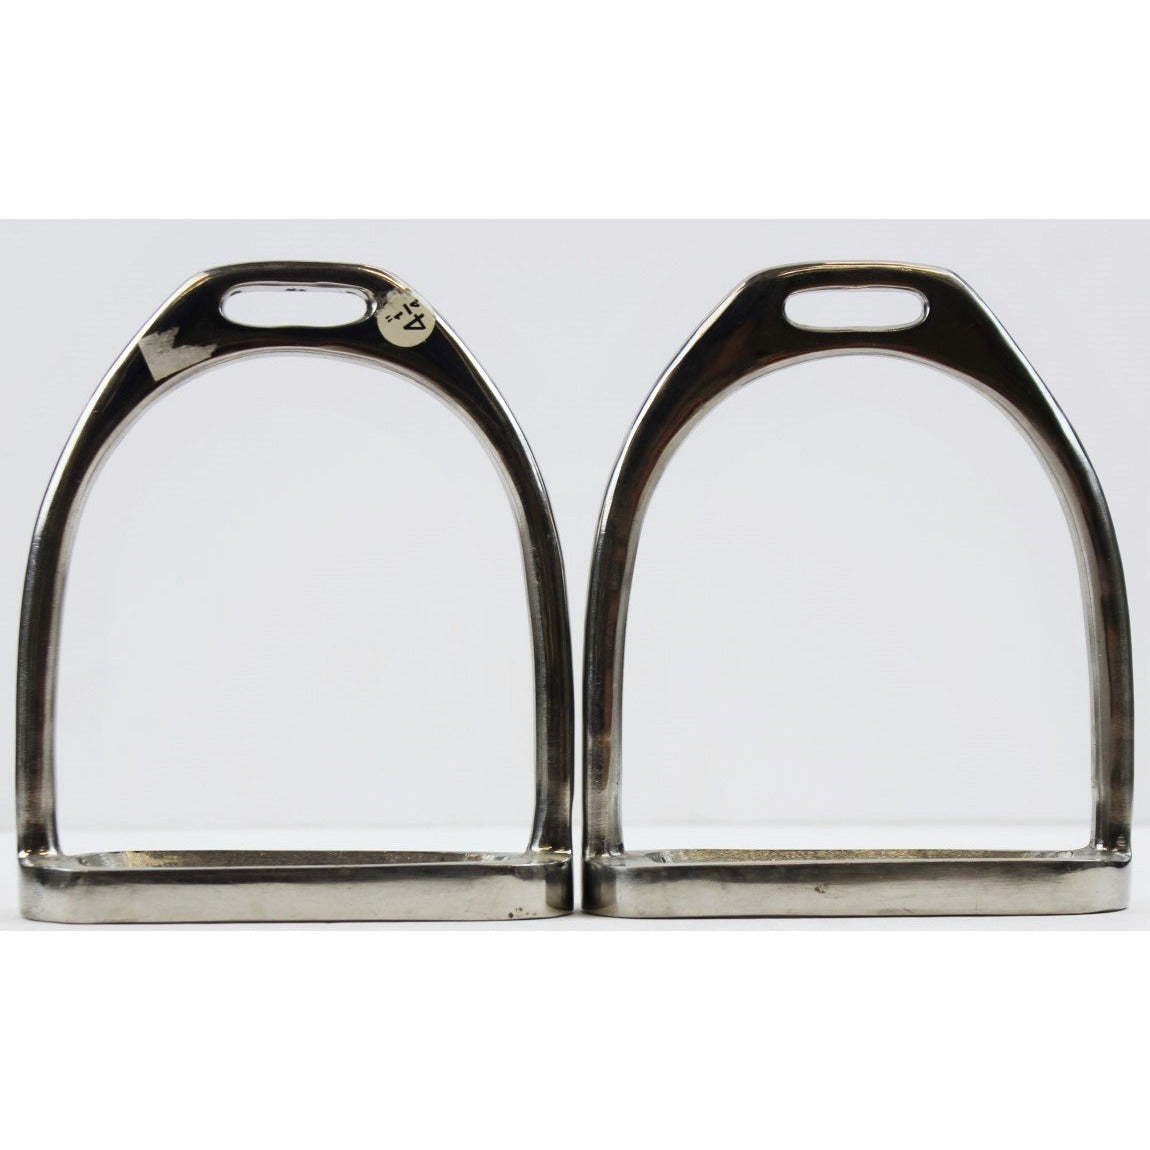 Pair of Silver Horse 4 1/4" Stirrups